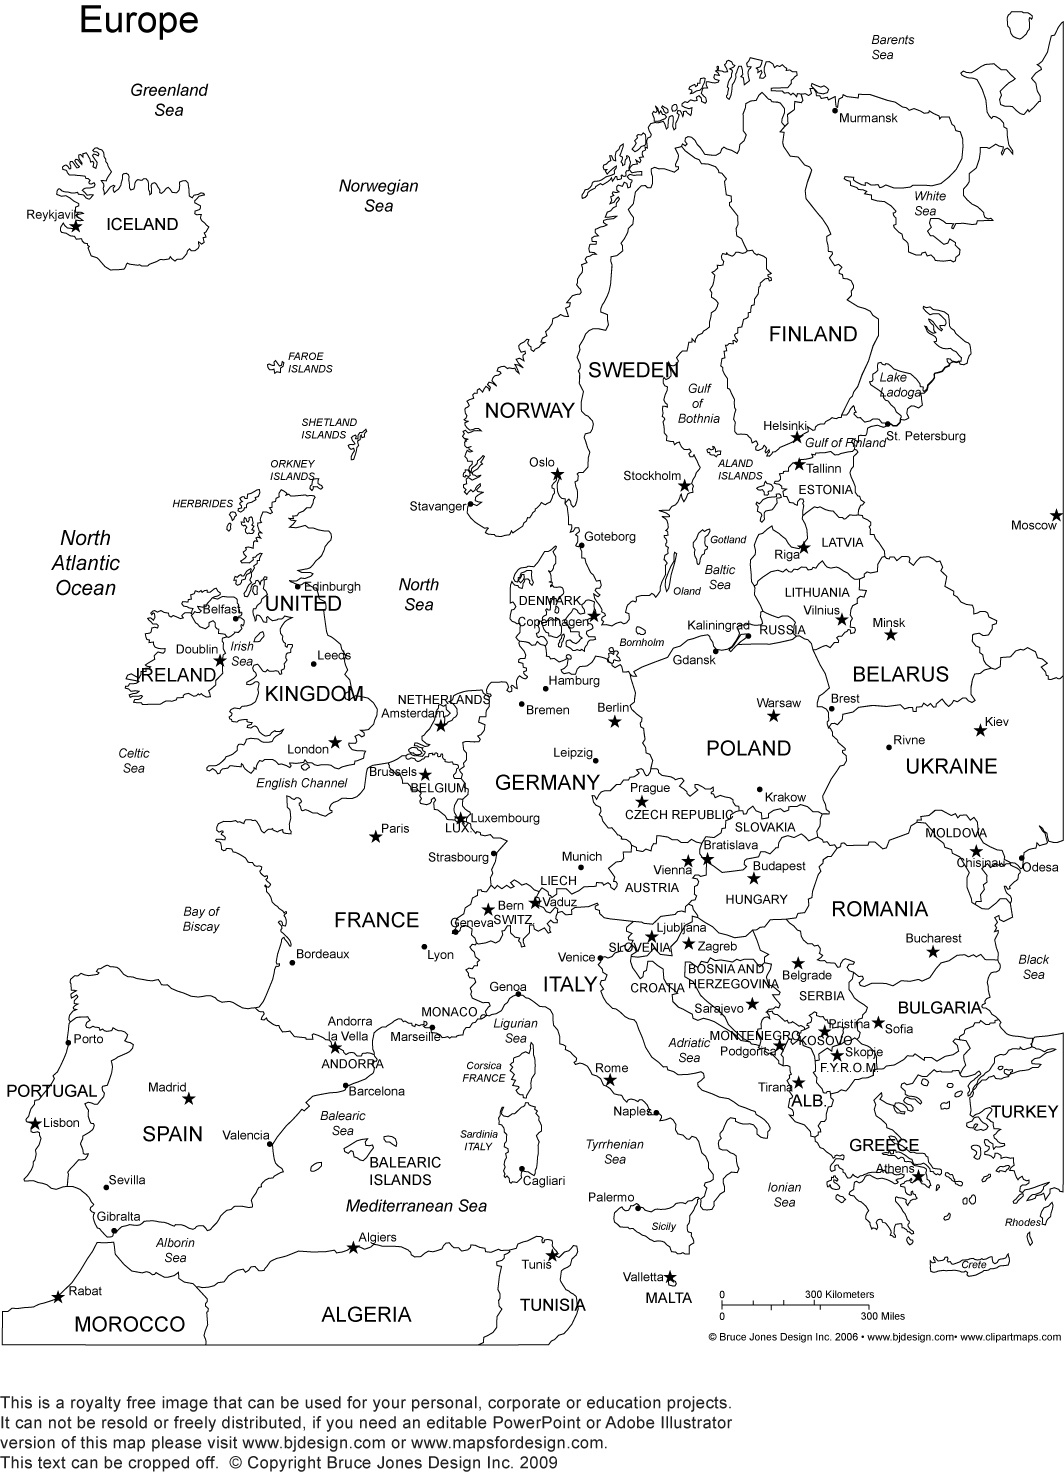 Printable Maps Of Europe With Cities And Travel Information - Free Printable Map Of Europe With Cities